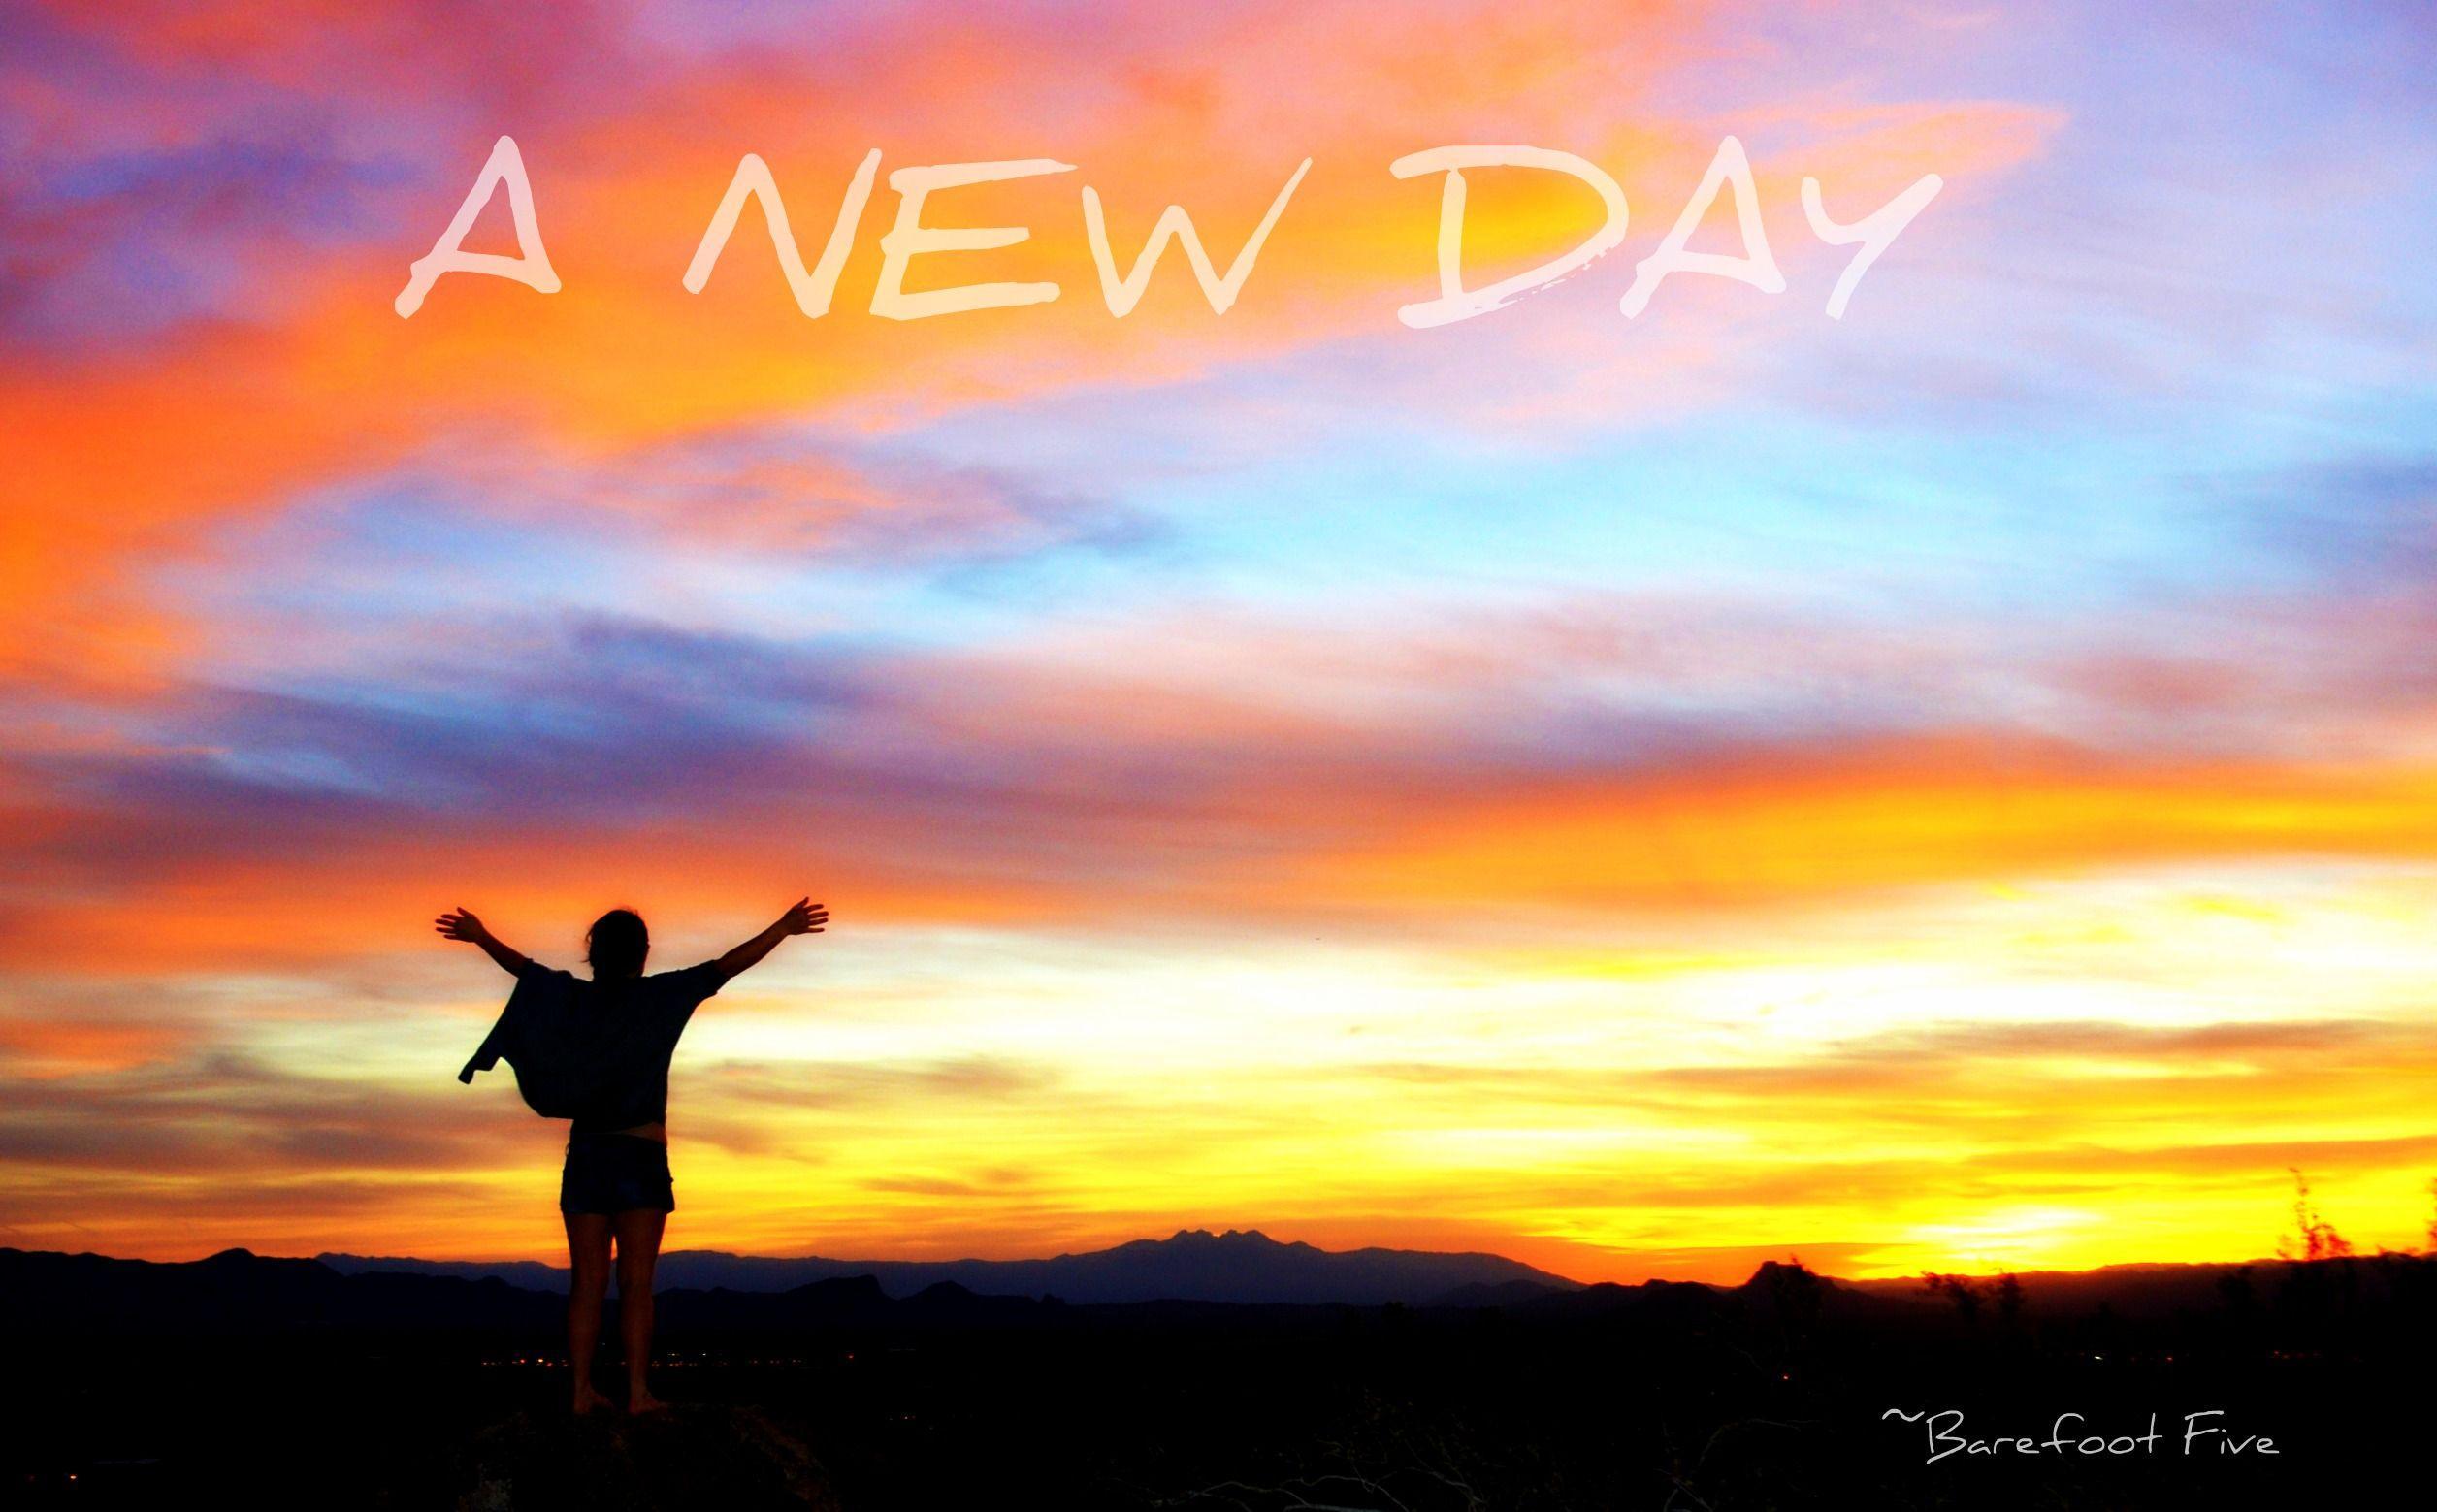 2512x1559px New Day (540.11 KB).04.2015